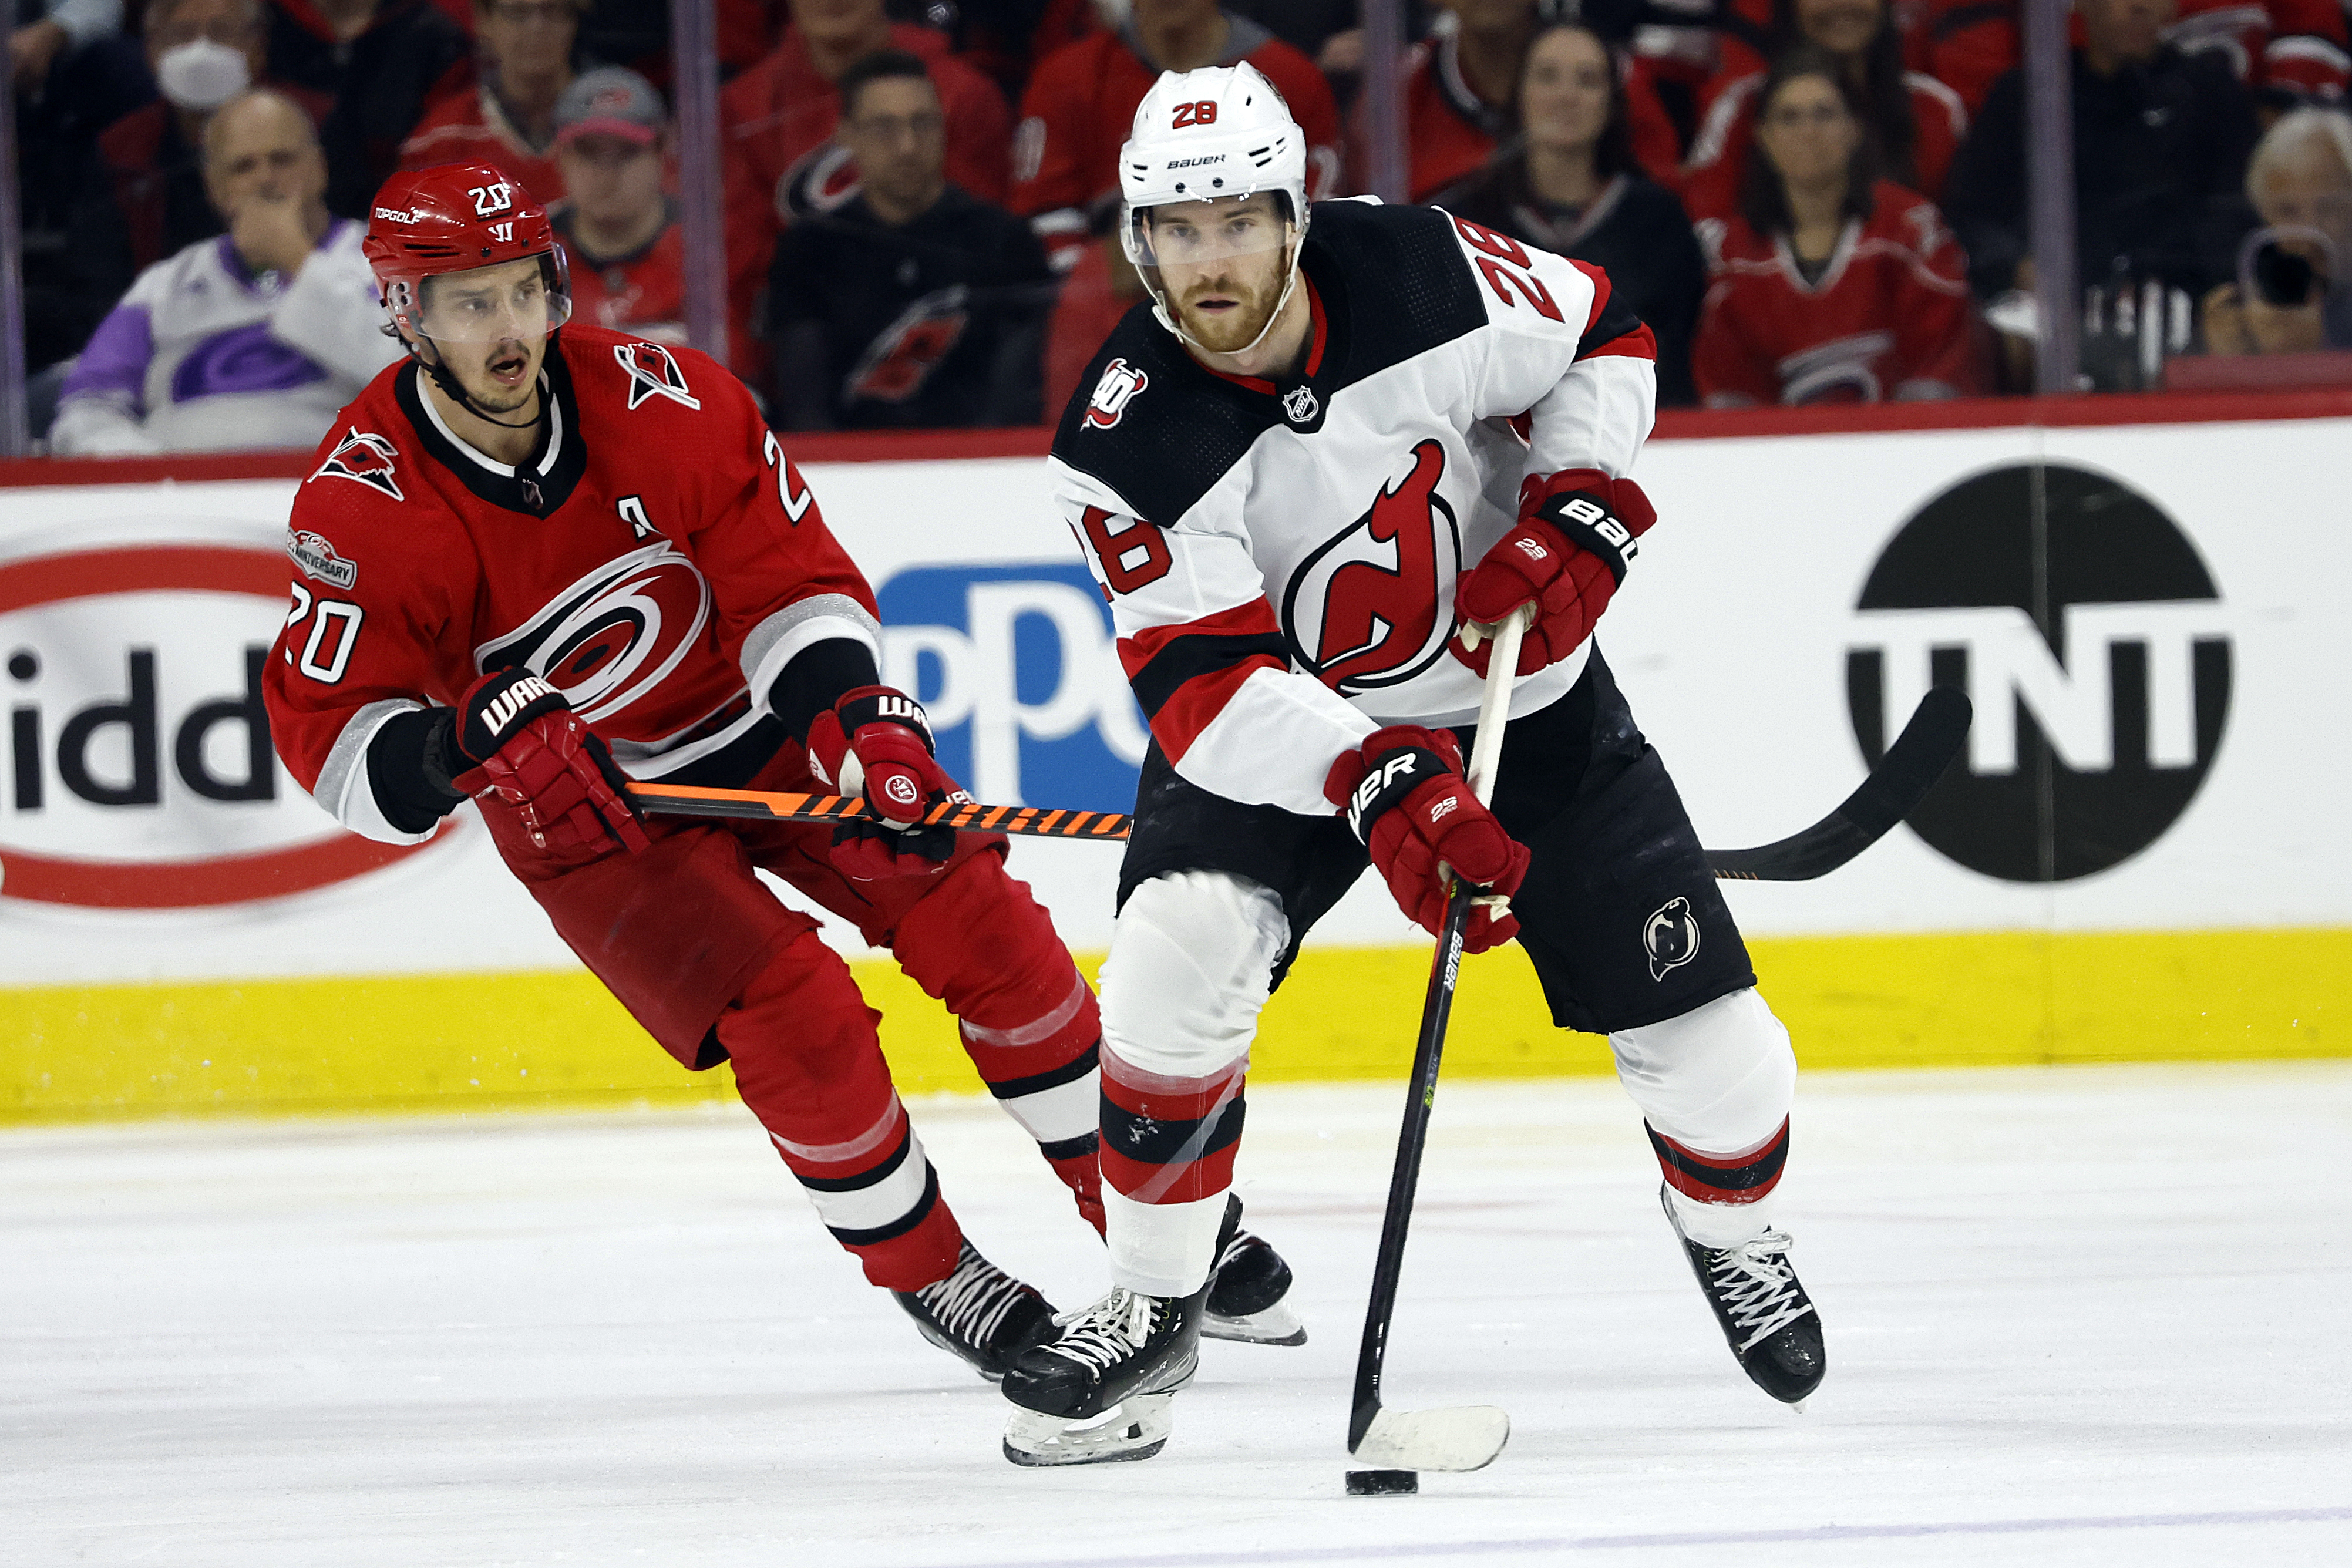 Hurricanes beat Devils 6-1, take 2-0 series lead heading back to